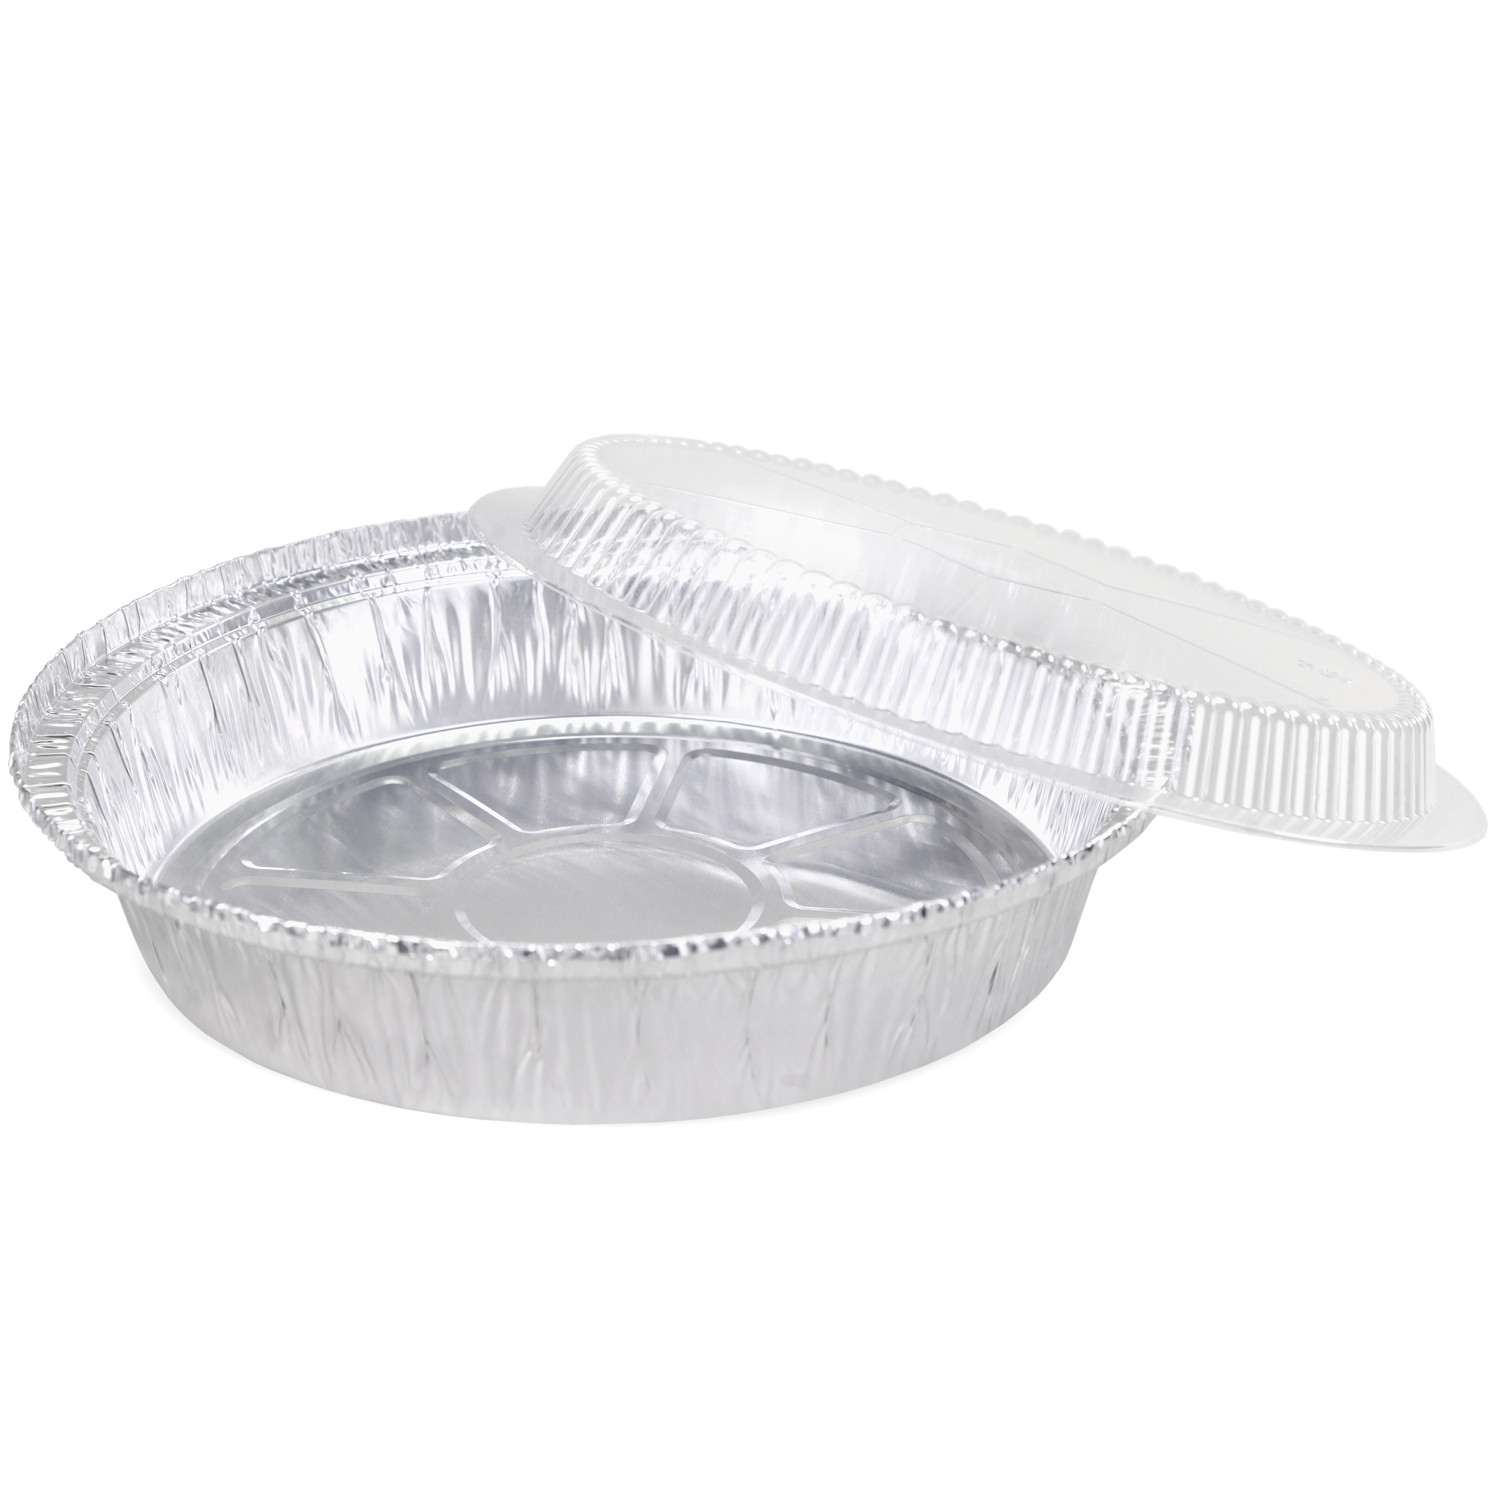 https://idlpack.com/image/cache/catalog/Products/Foil%20Pans%20and%20Trays/_MG_9936_1500-1500x1500.jpg